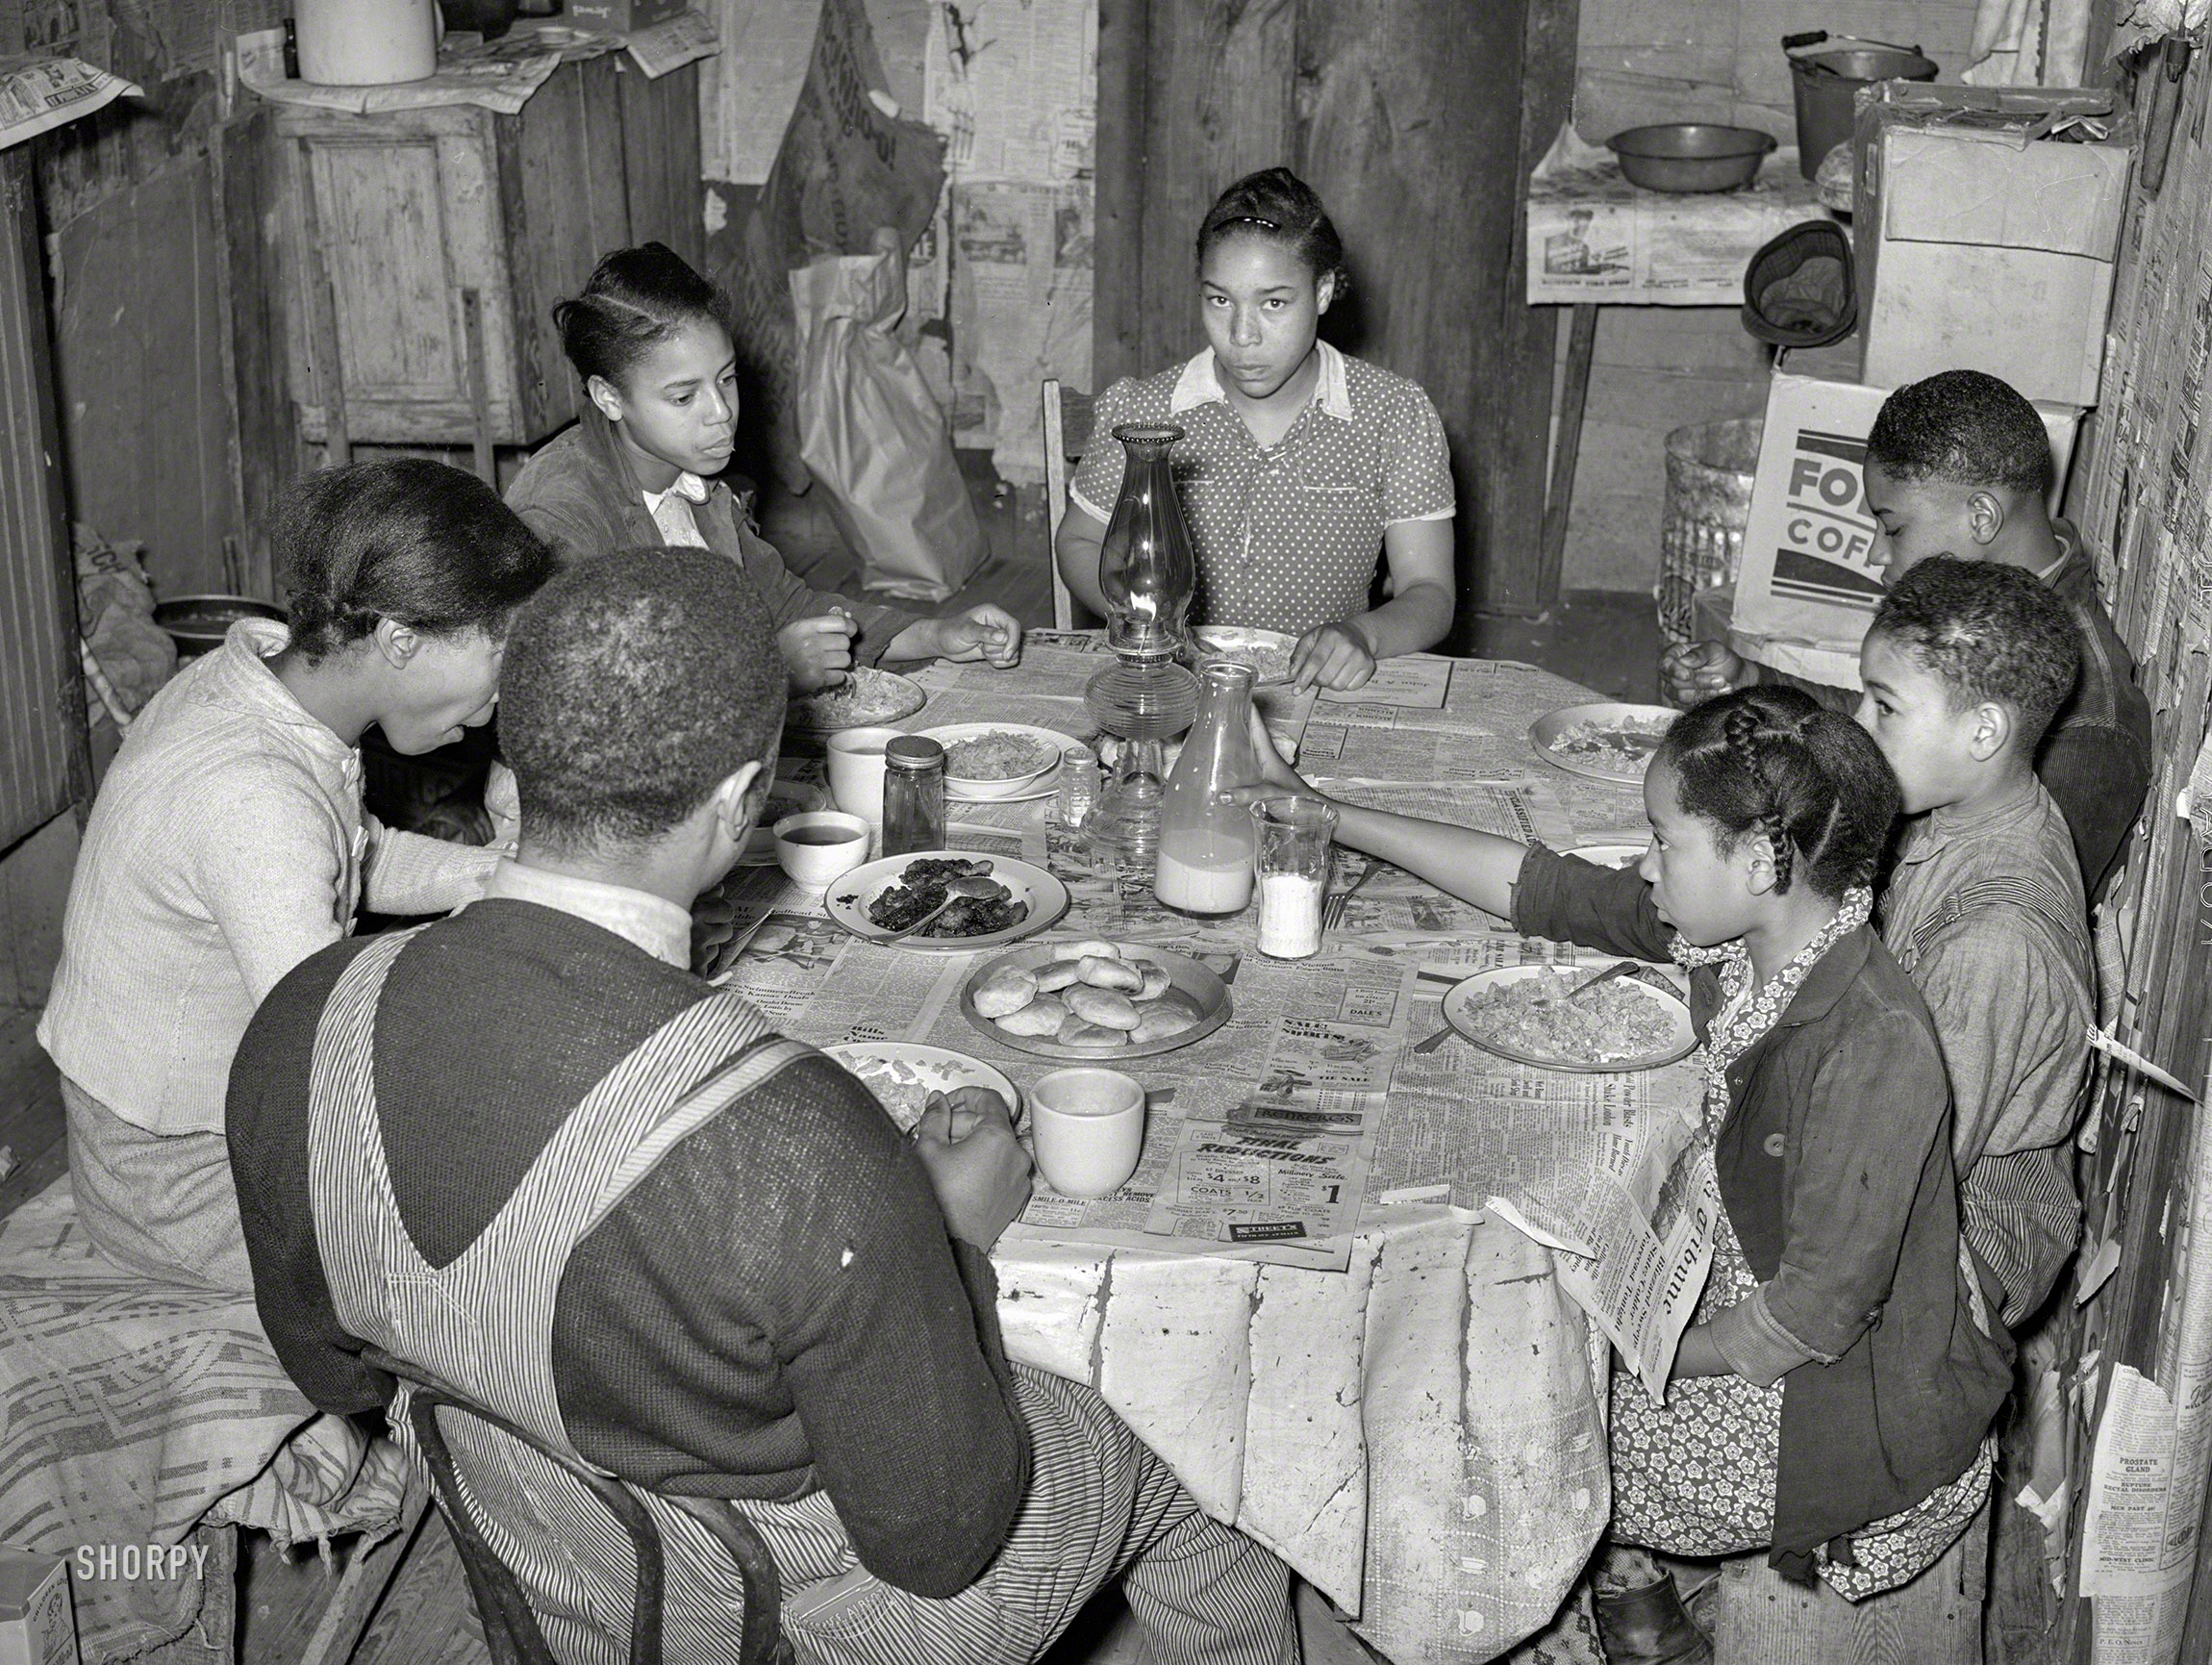 February 1940. "Family of tenant farmer Pomp Hall, eating breakfast consisting of corn flakes, biscuits, fried bacon, milk and coffee. Creek County, Oklahoma." Photo by Russell Lee for the Farm Security Administration. View full size.